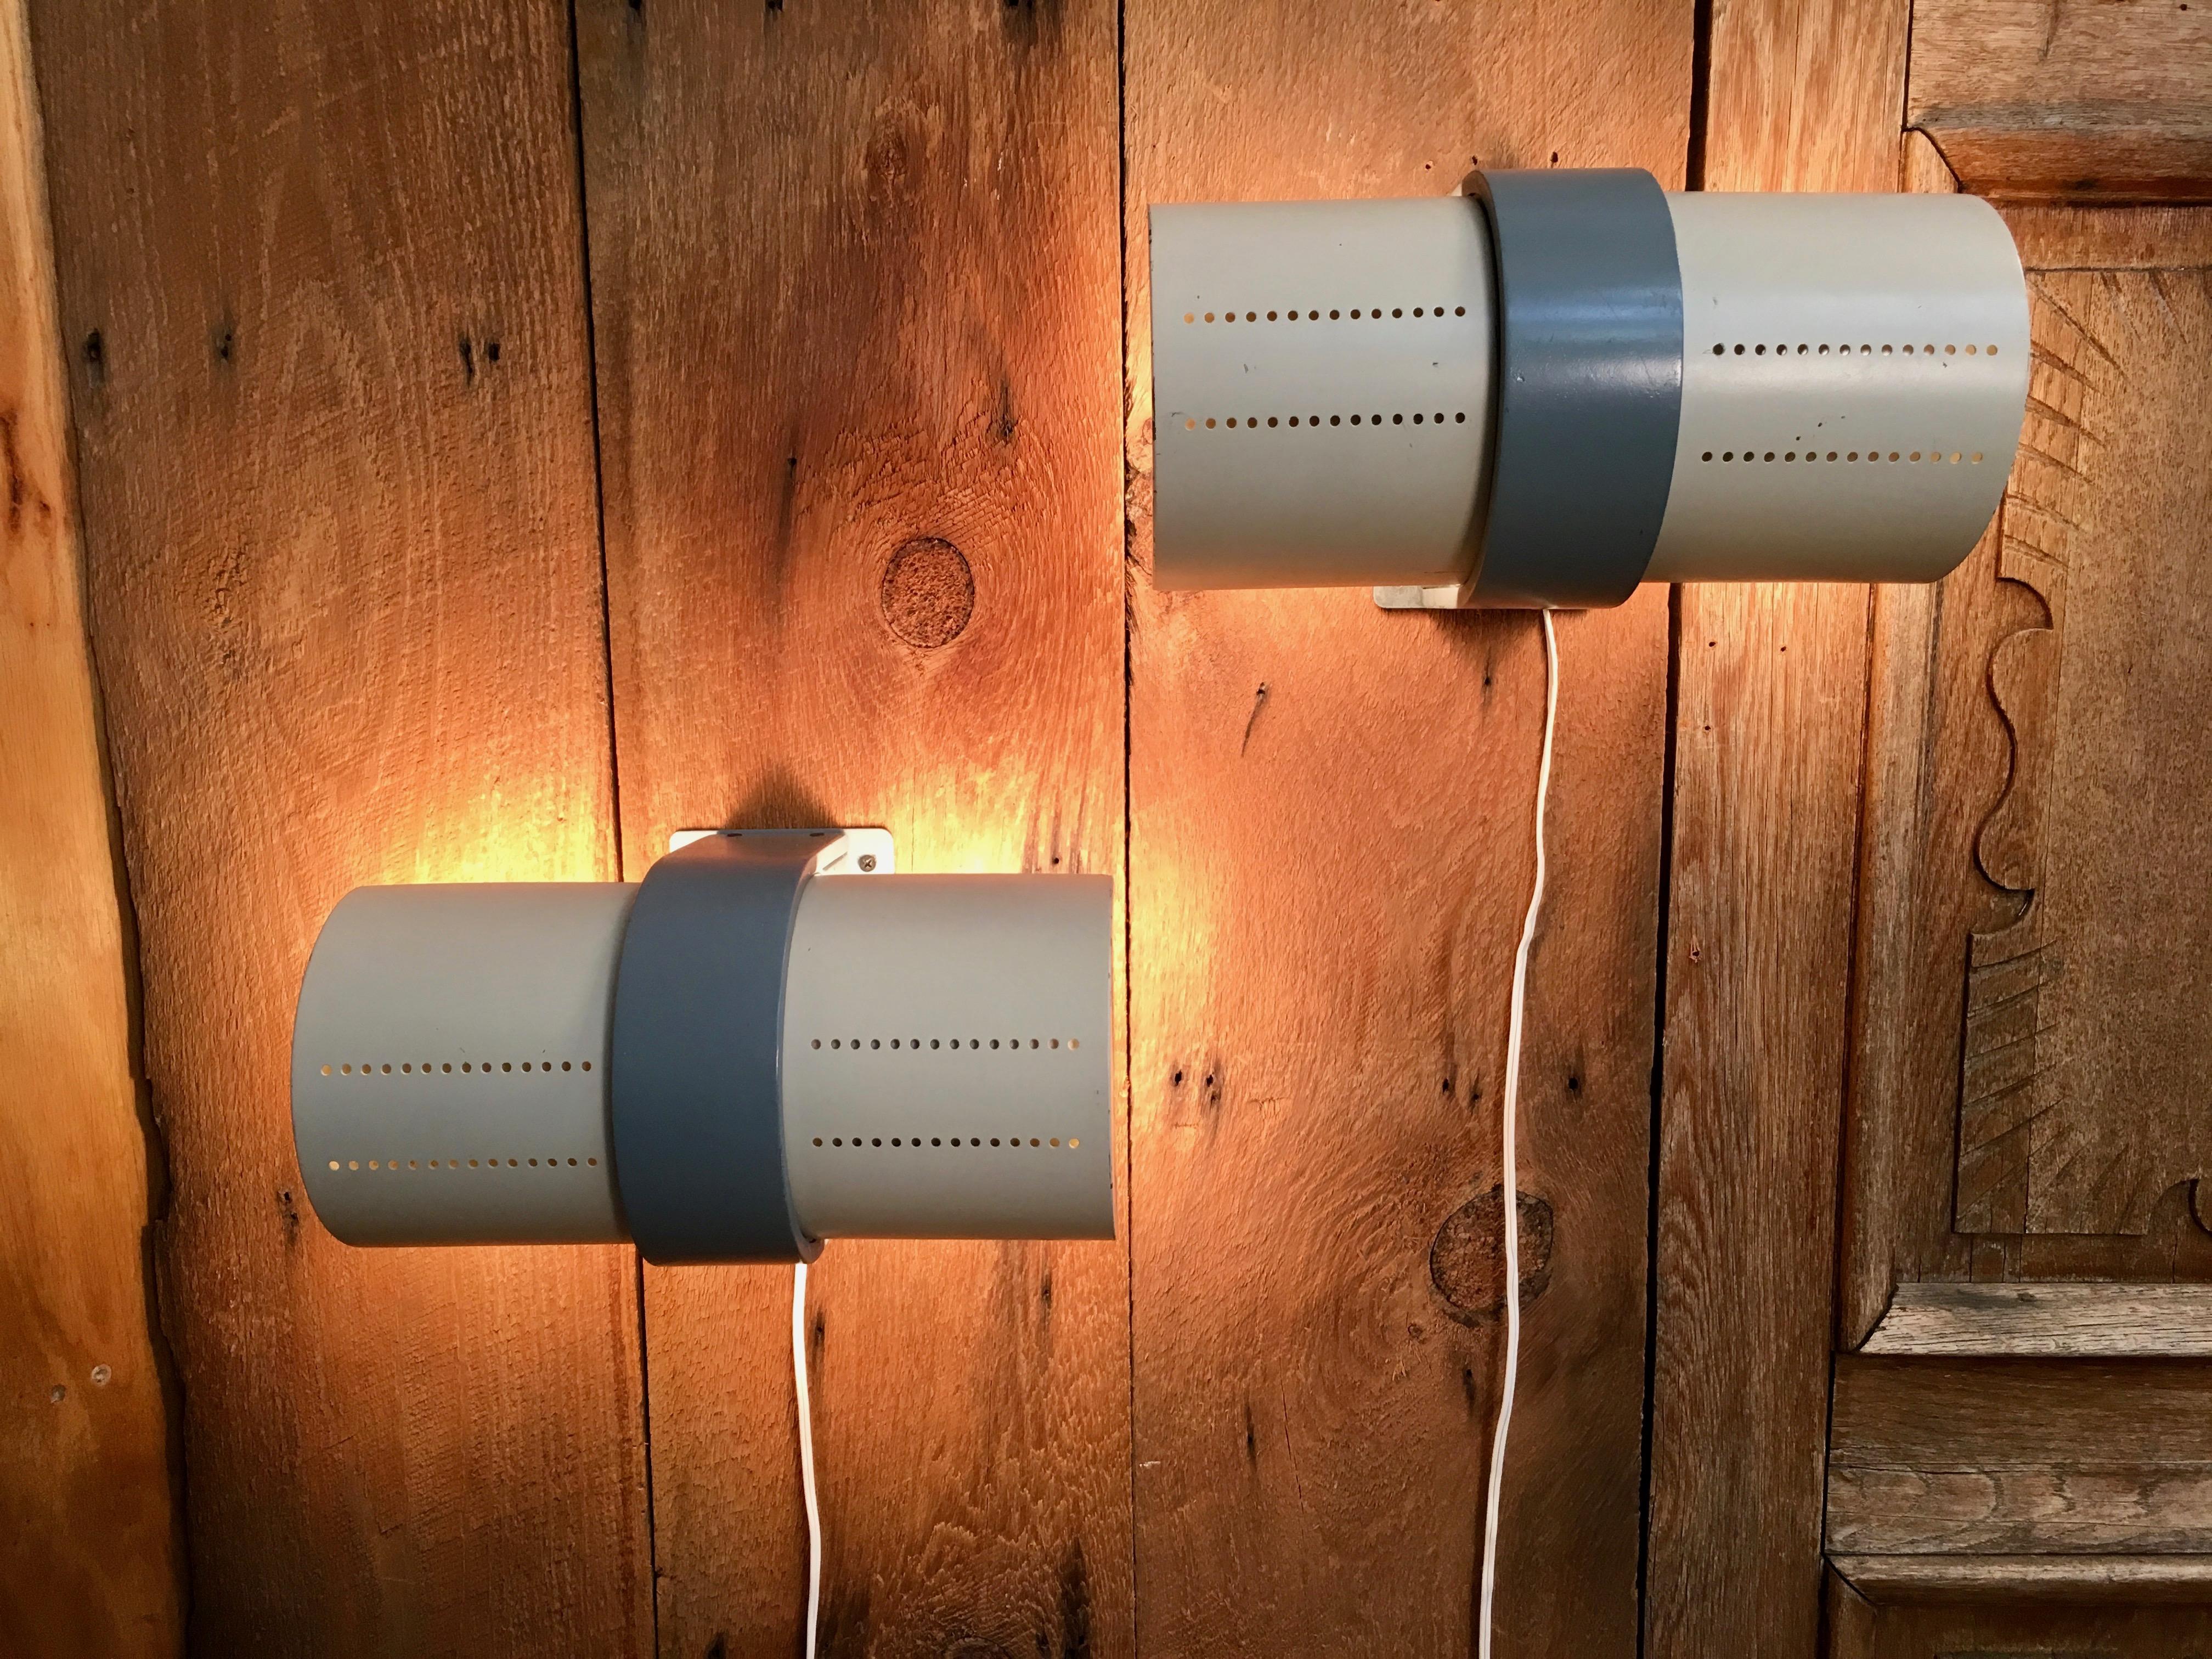 A pair of modernist two-tone painted metal wall lights. The shades are adjustable to direct the light up or down or on a slant.